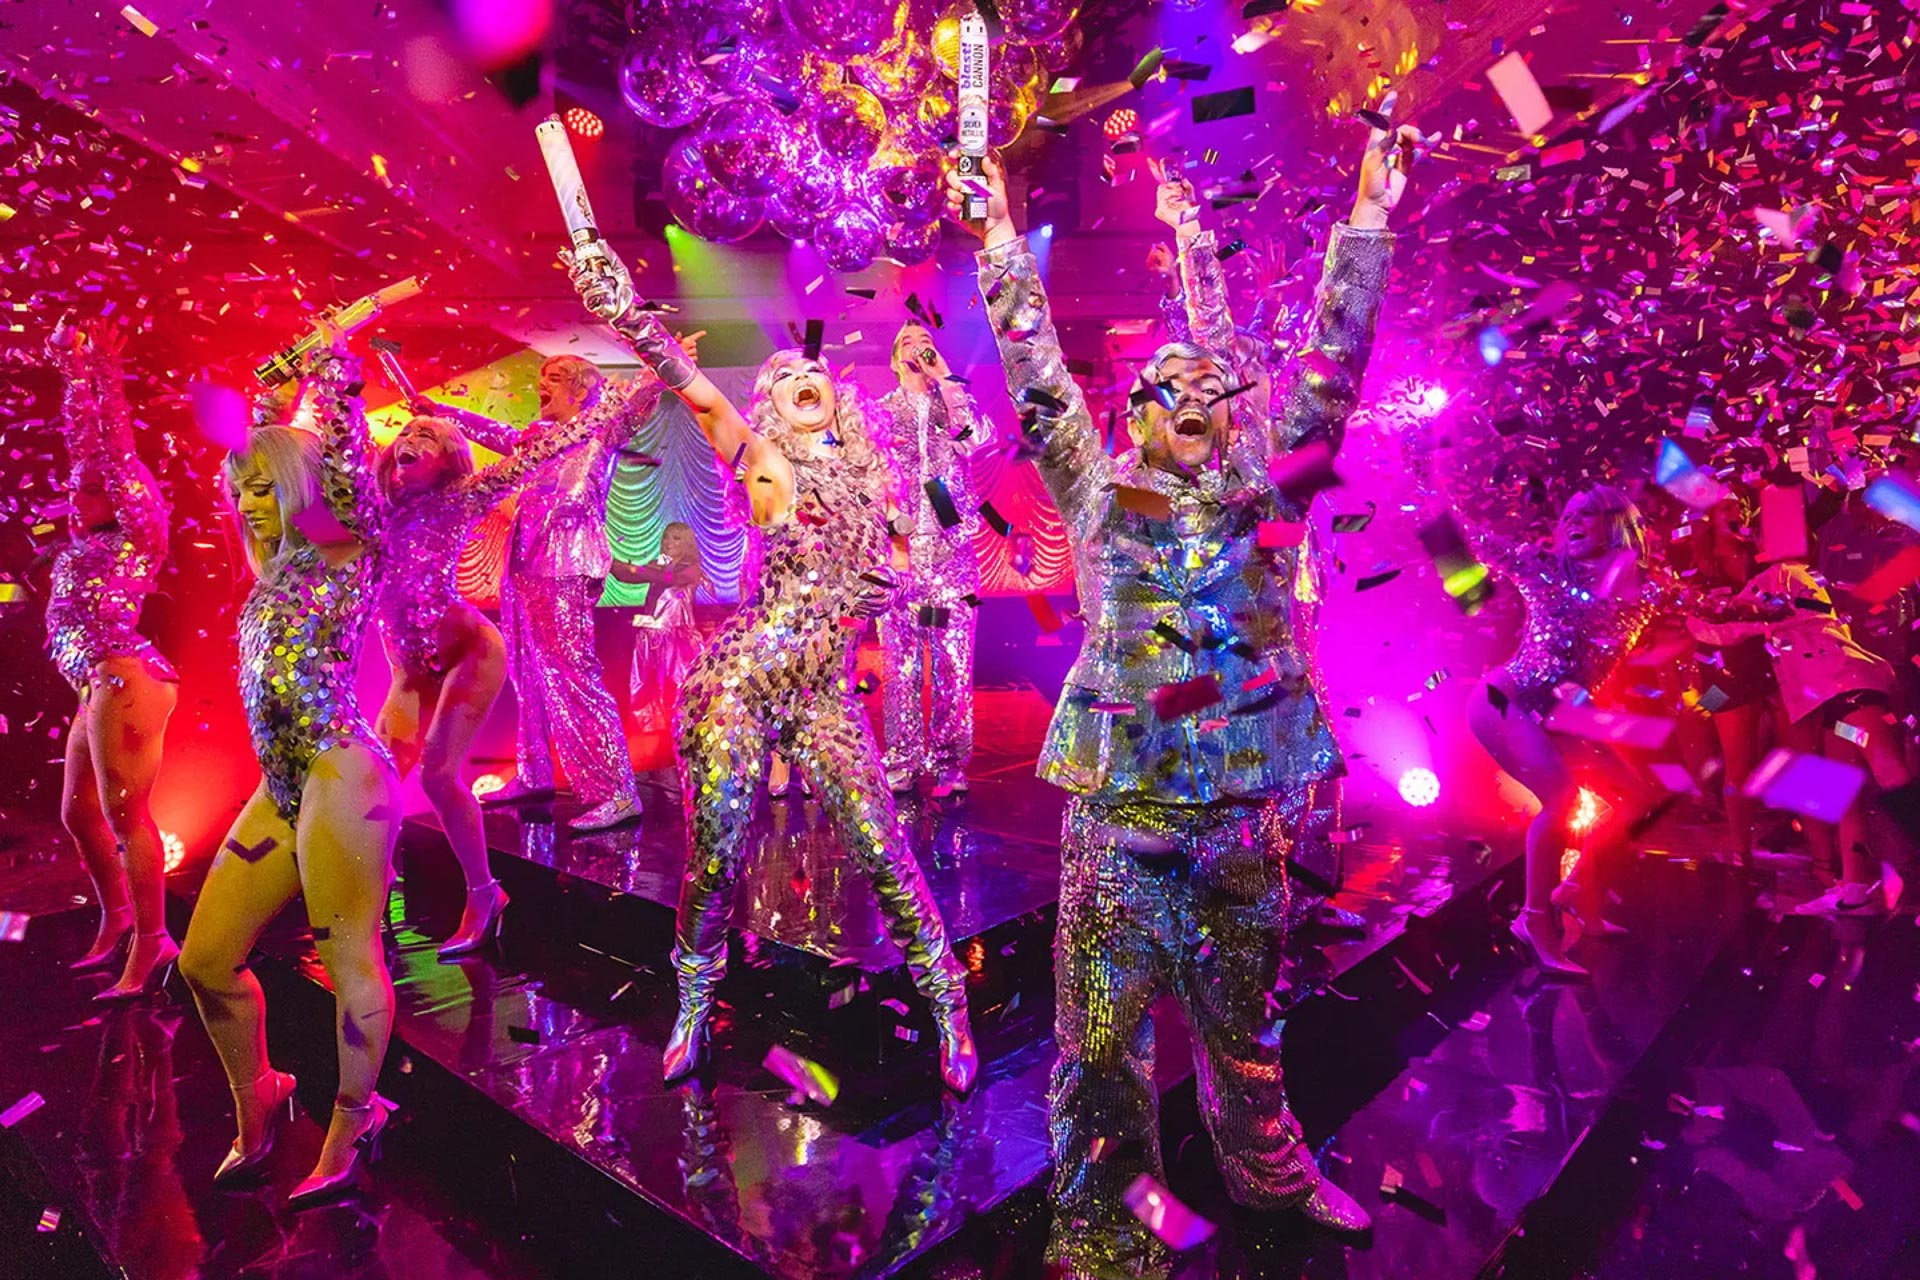 Click here to open the gallery overlay for the image: people celebrating in a colorful setting with confetti